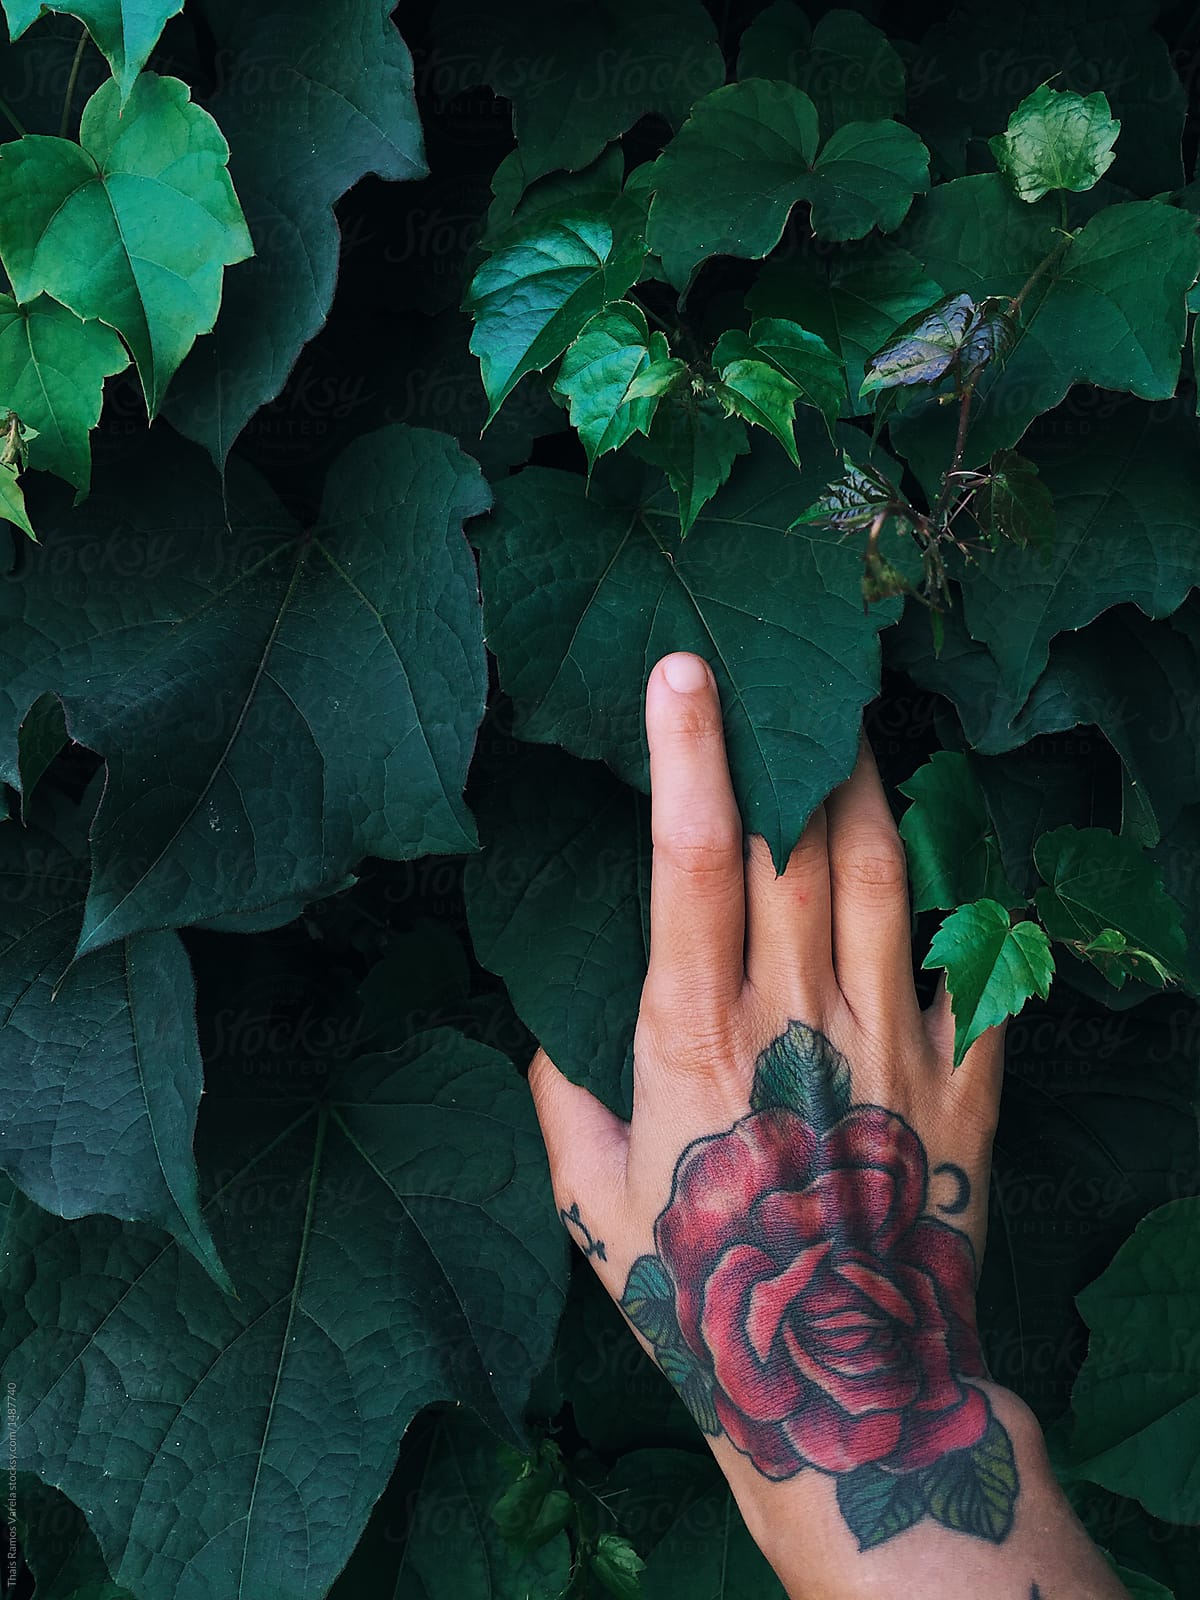 Female Hand Wit A Rose Tattoo Touching Leaves By Thais Varela Stocksy United